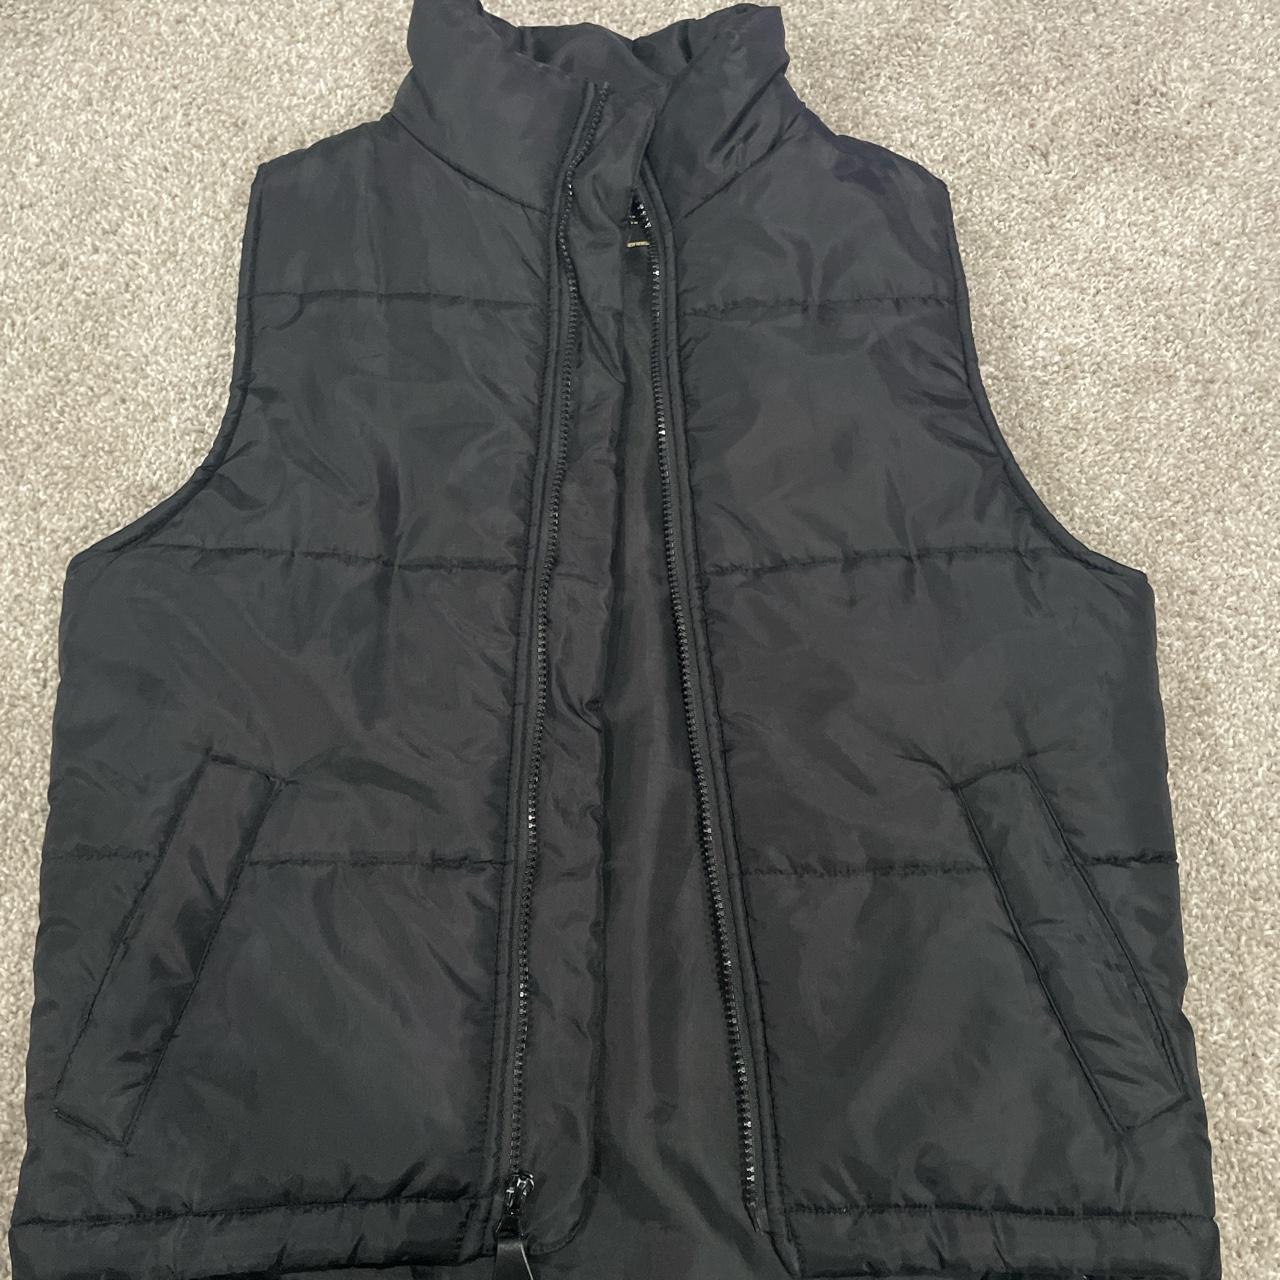 Black thrifted jacket vest •thrifted a while ago... - Depop